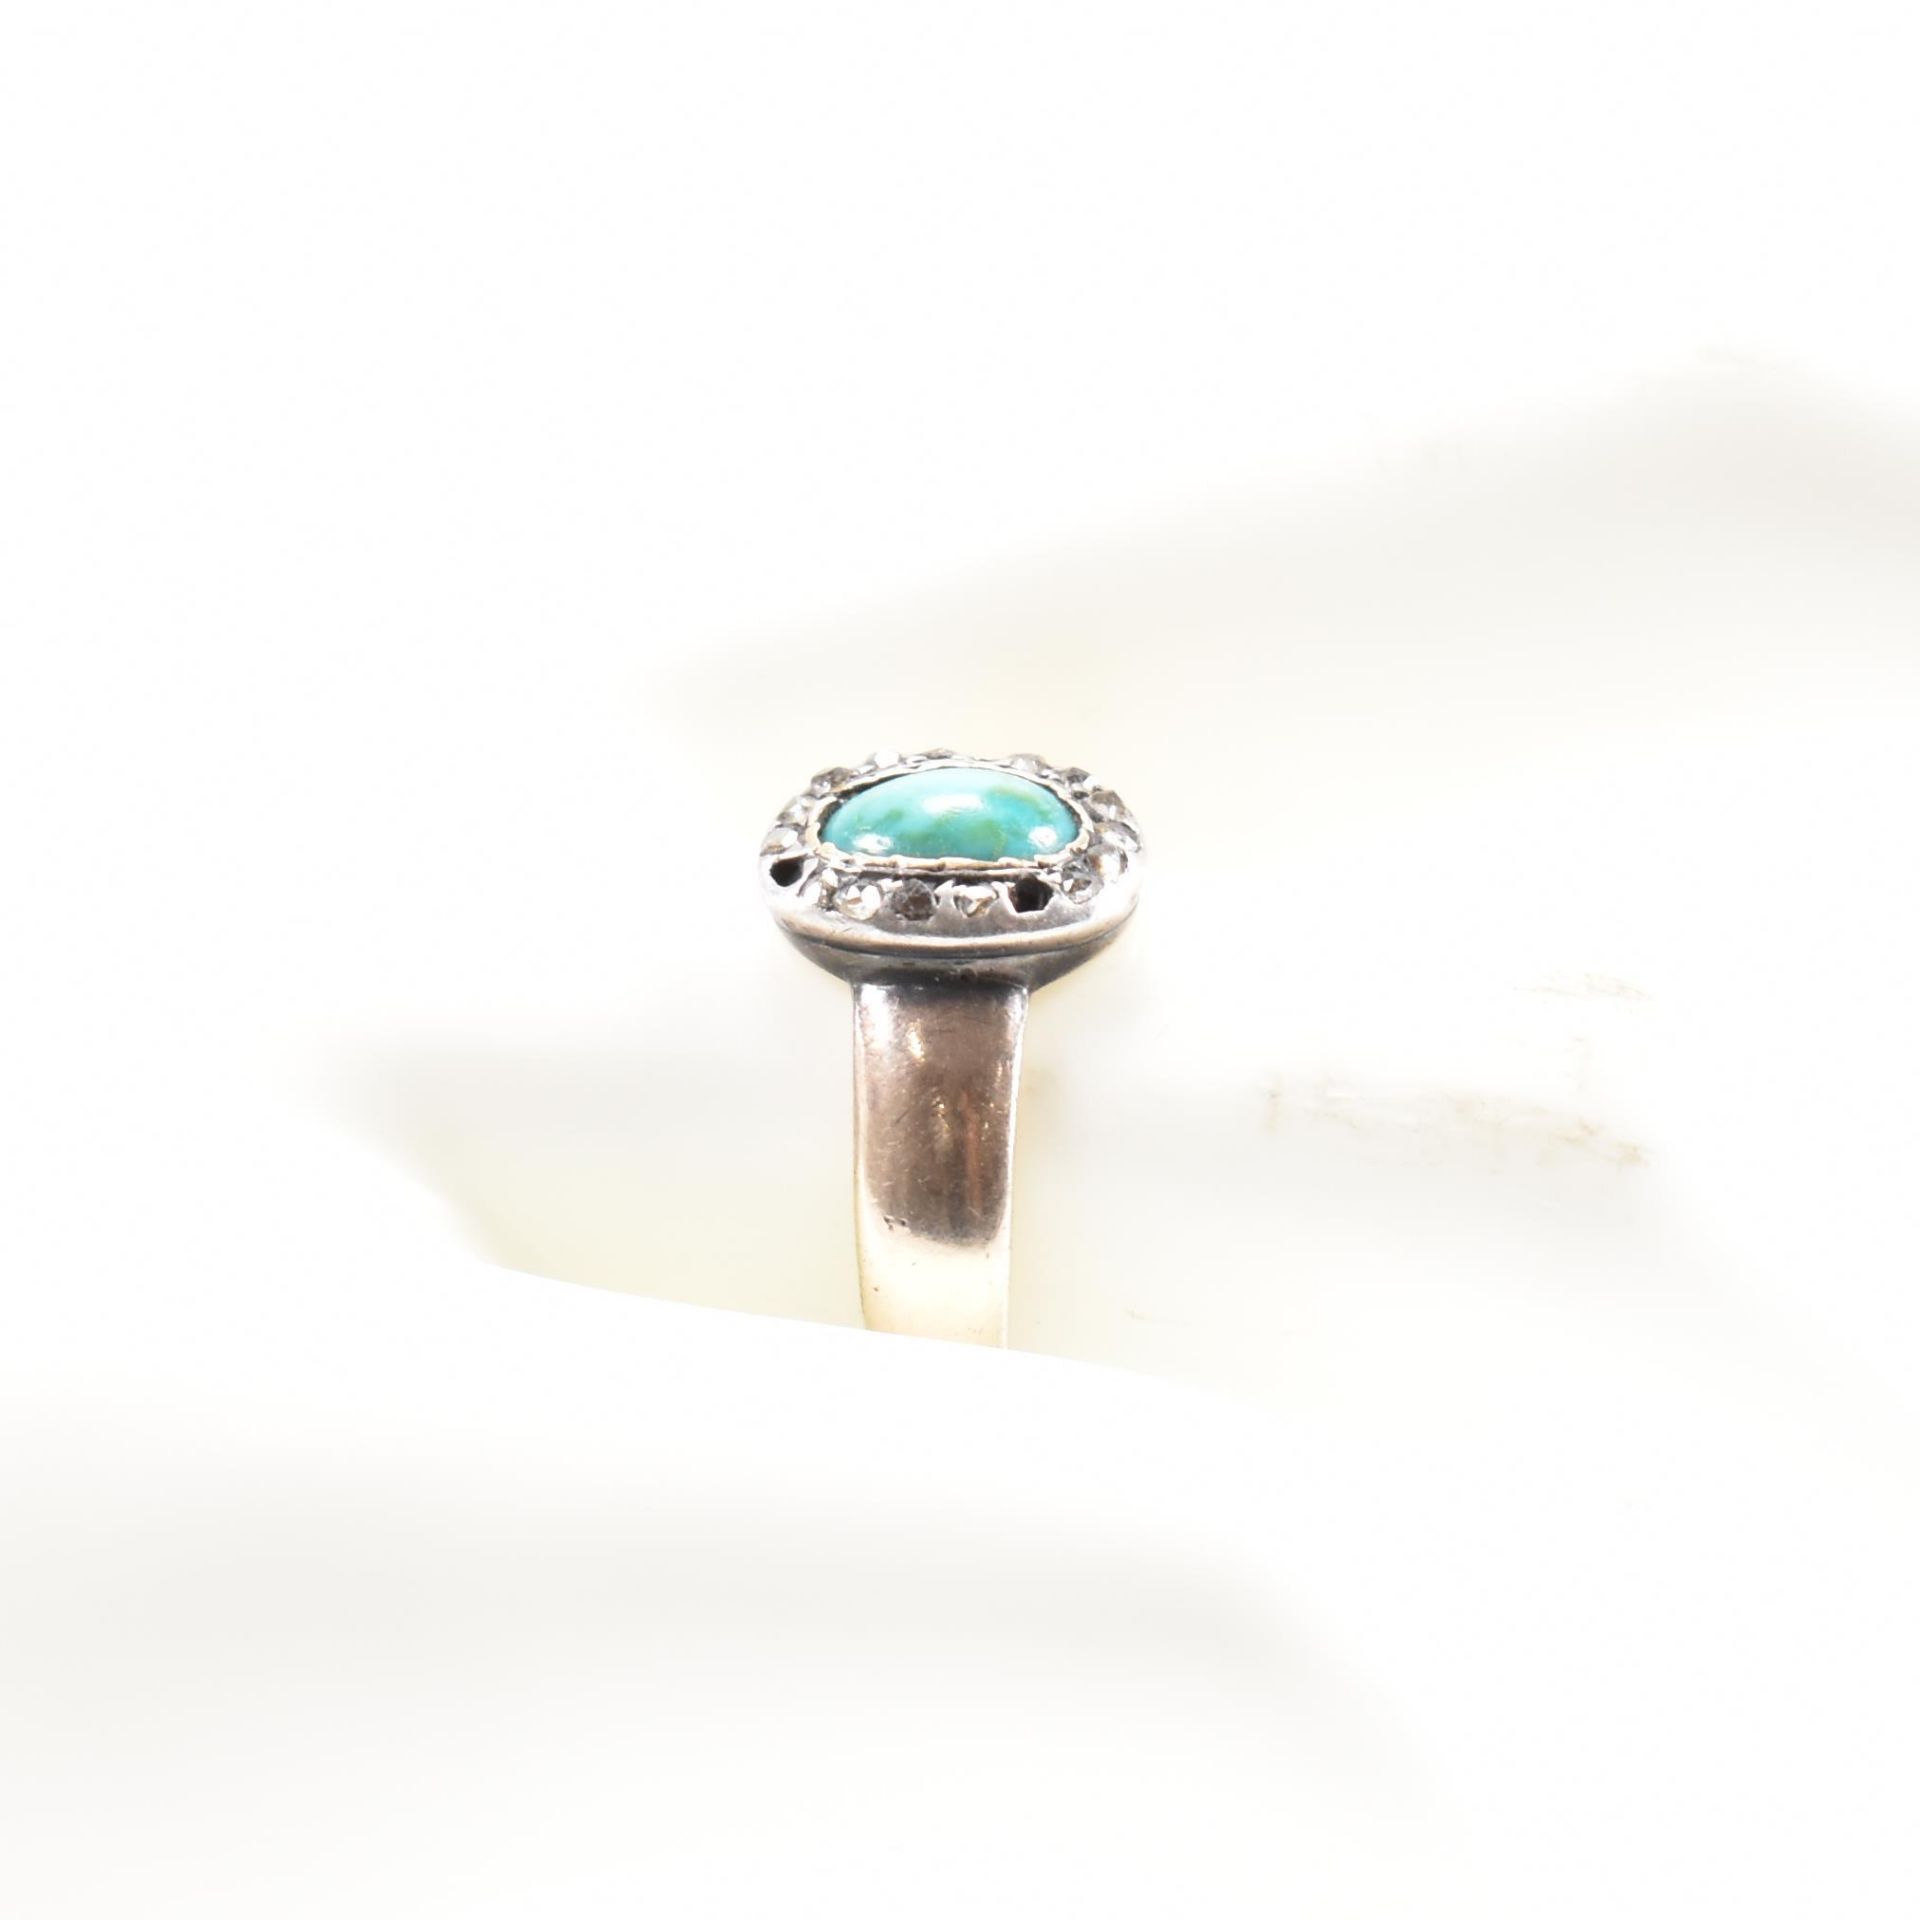 19TH CENTURY TURQUOISE & DIAMOND CLUSTER RING - Image 7 of 7